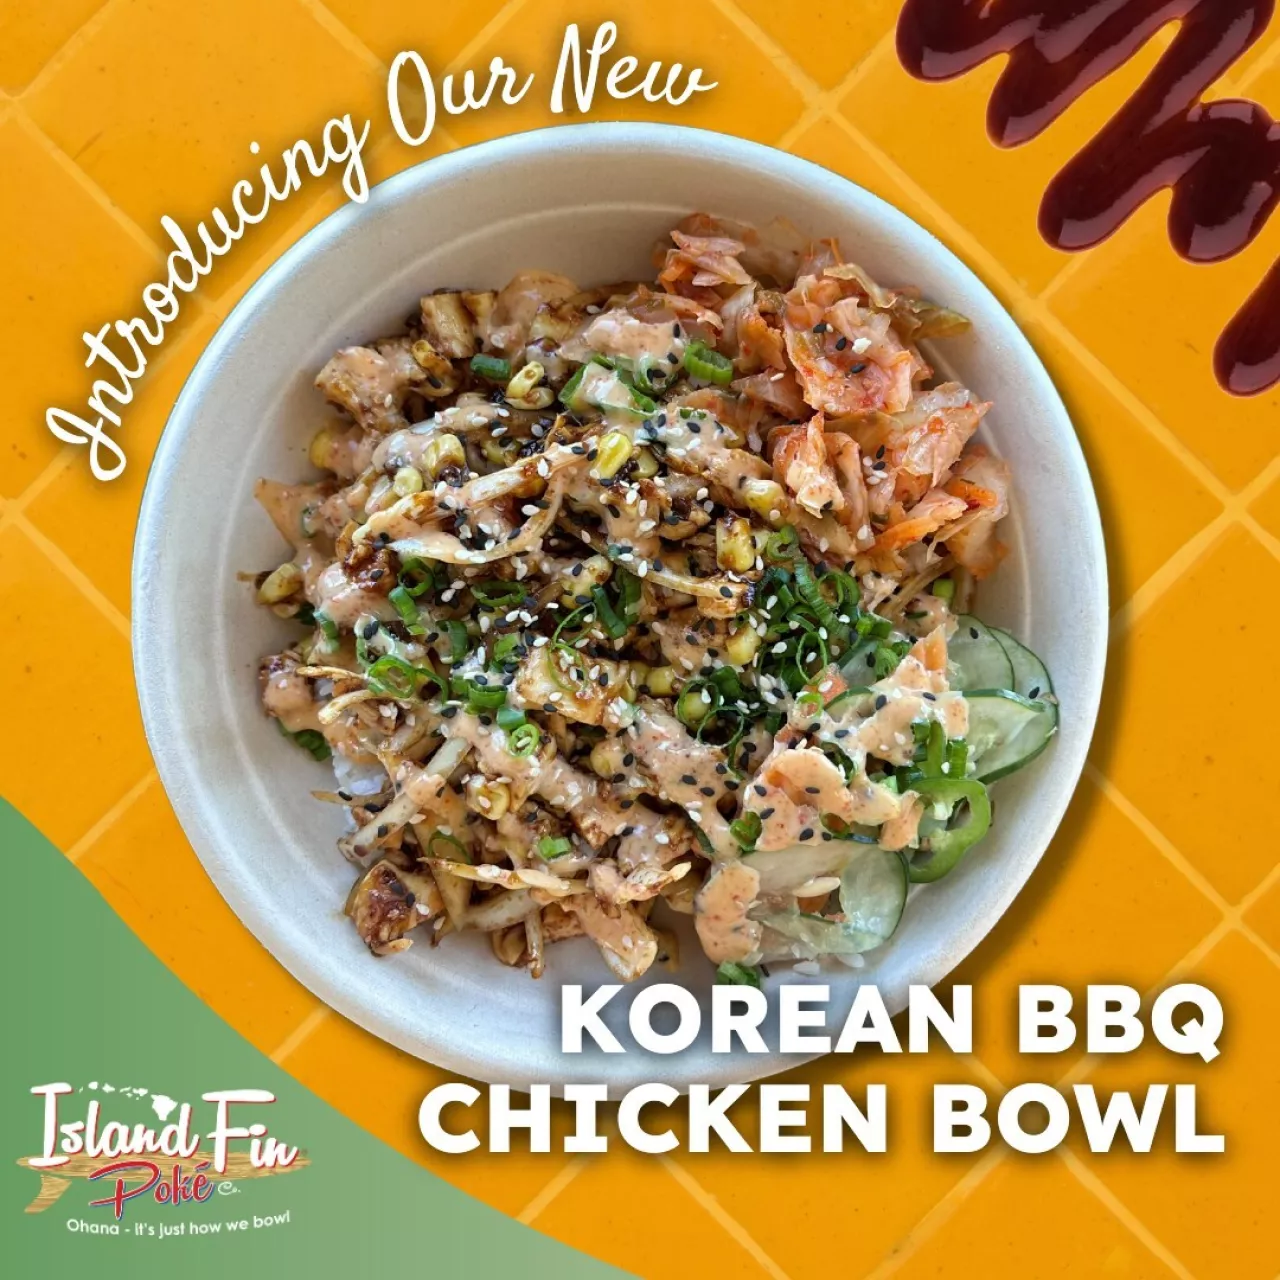 Island Fin Poké Co. Introduces Korean BBQ Chicken Bowl For a Limited Time to Broaden Menu for Guests img#1